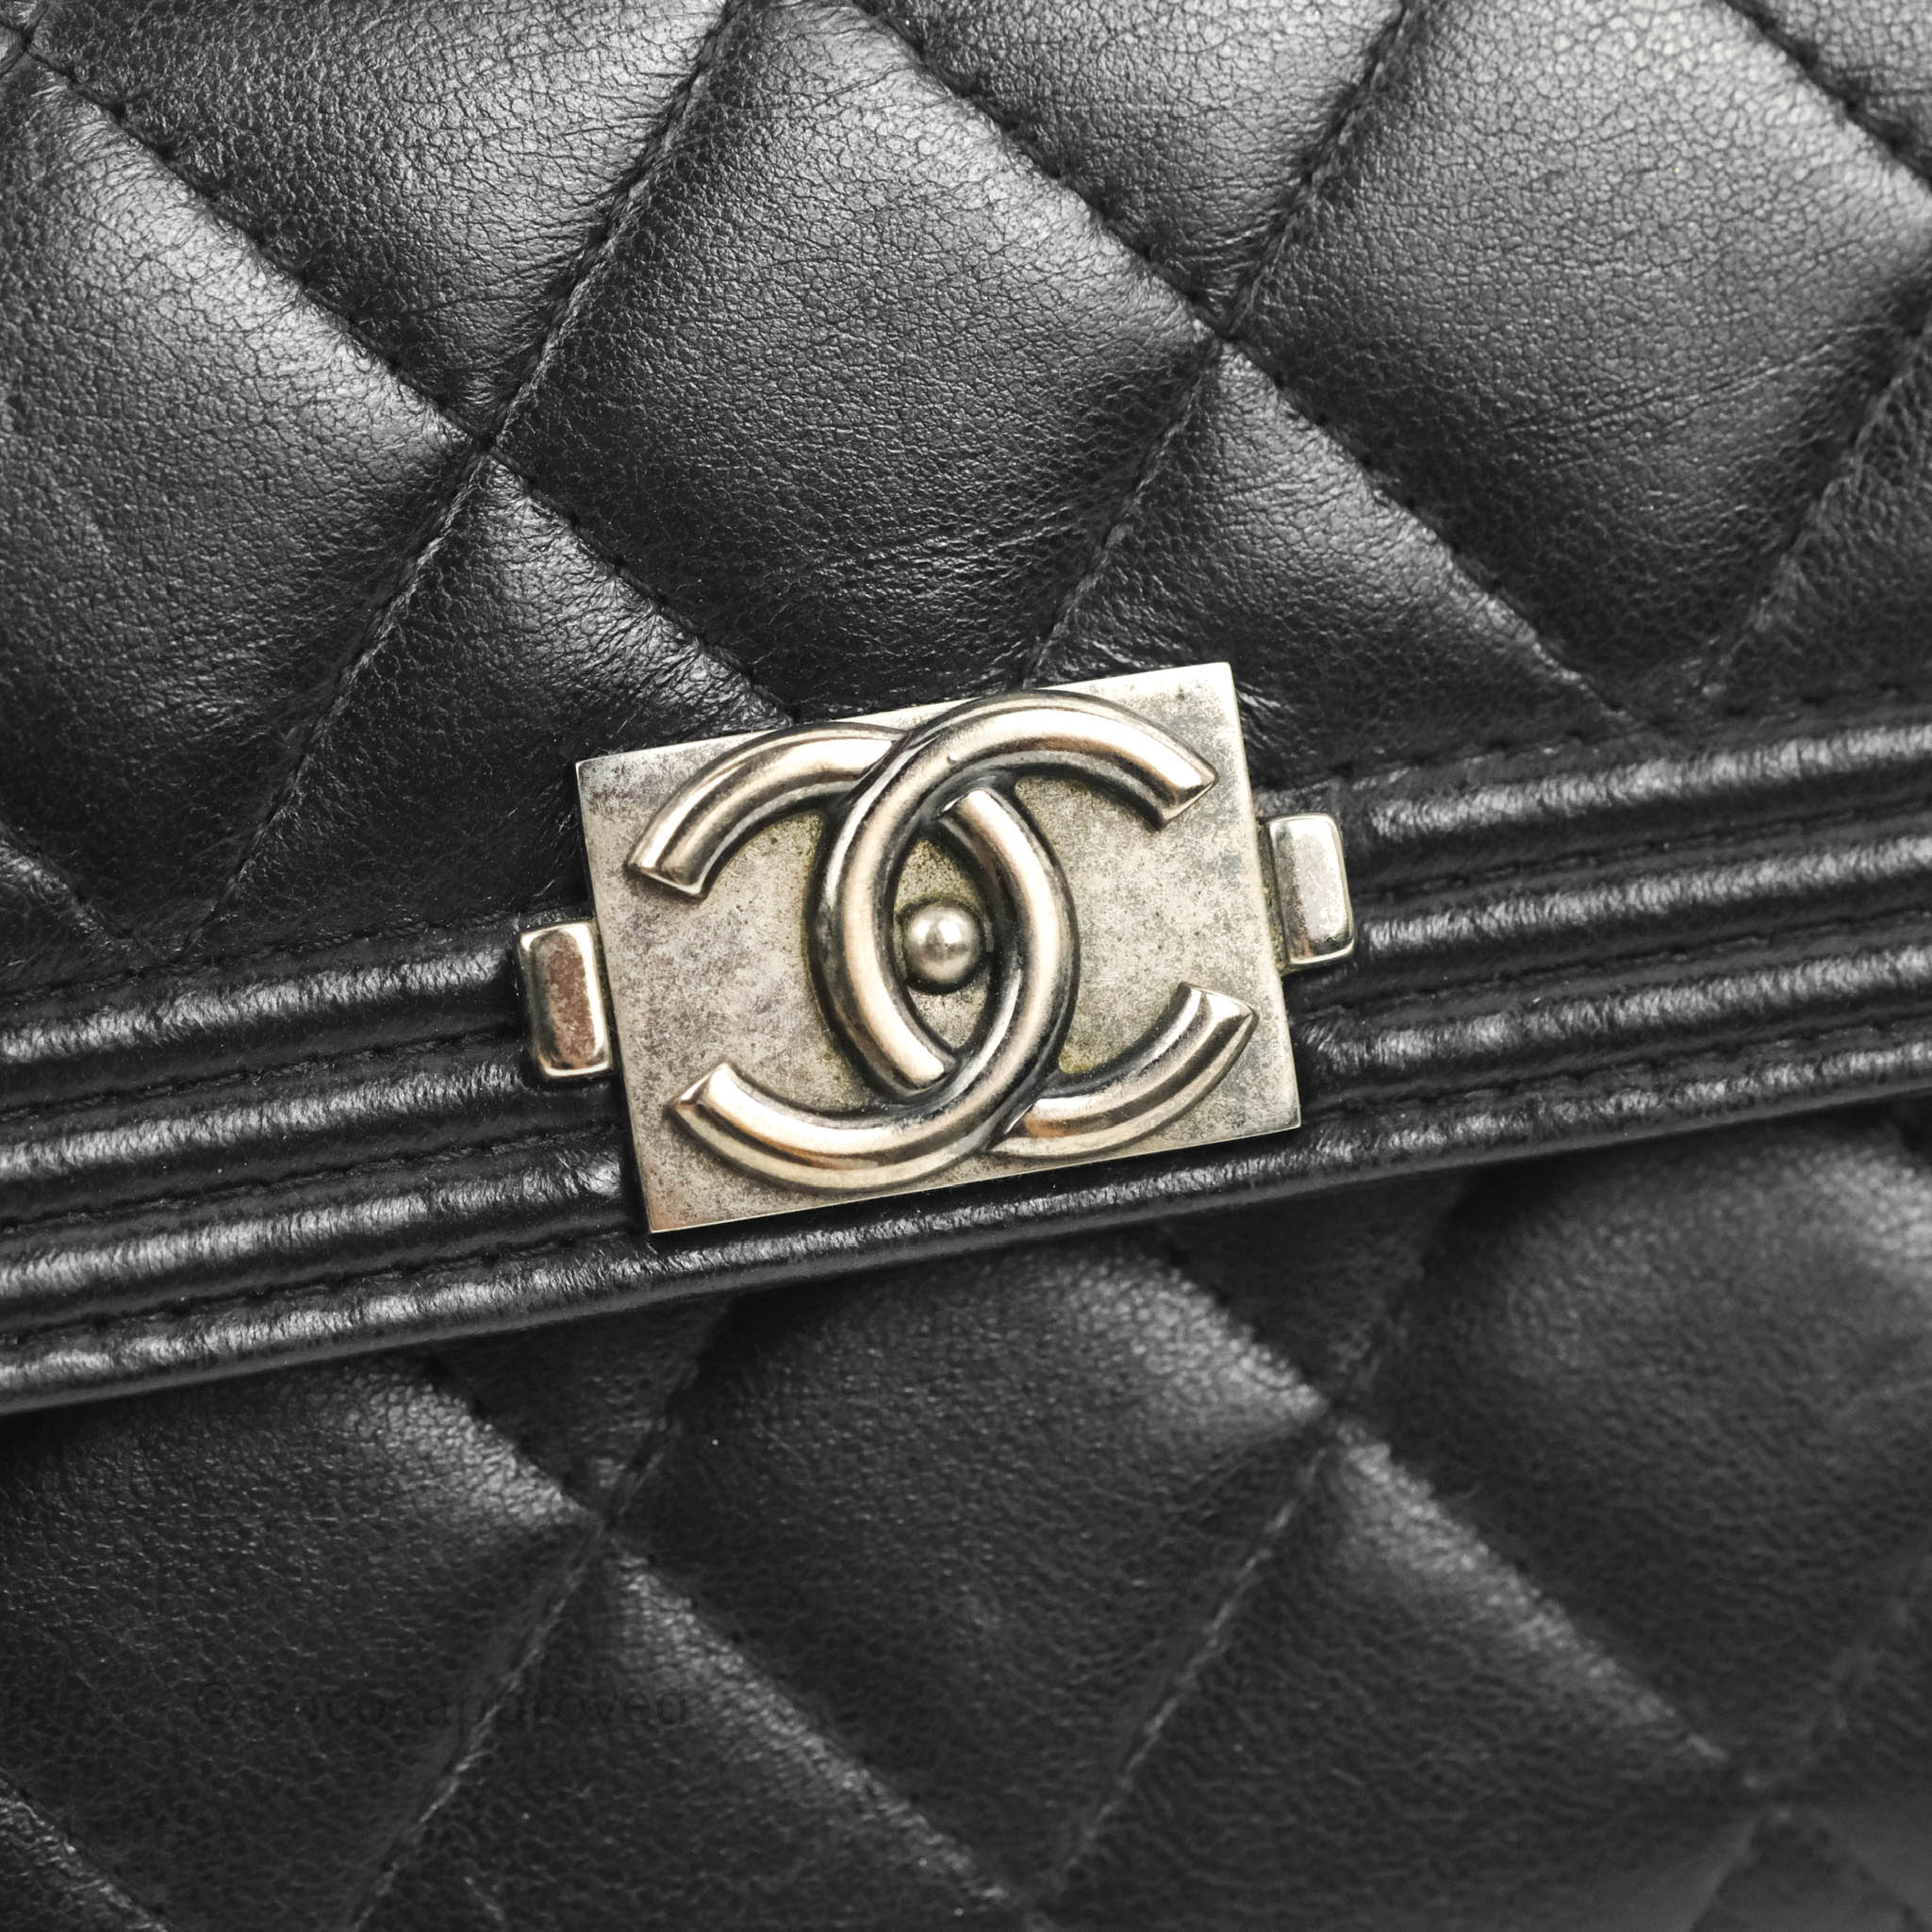 Chanel Long Flap Wallet Blue Caviar Gold Hardware – Coco Approved